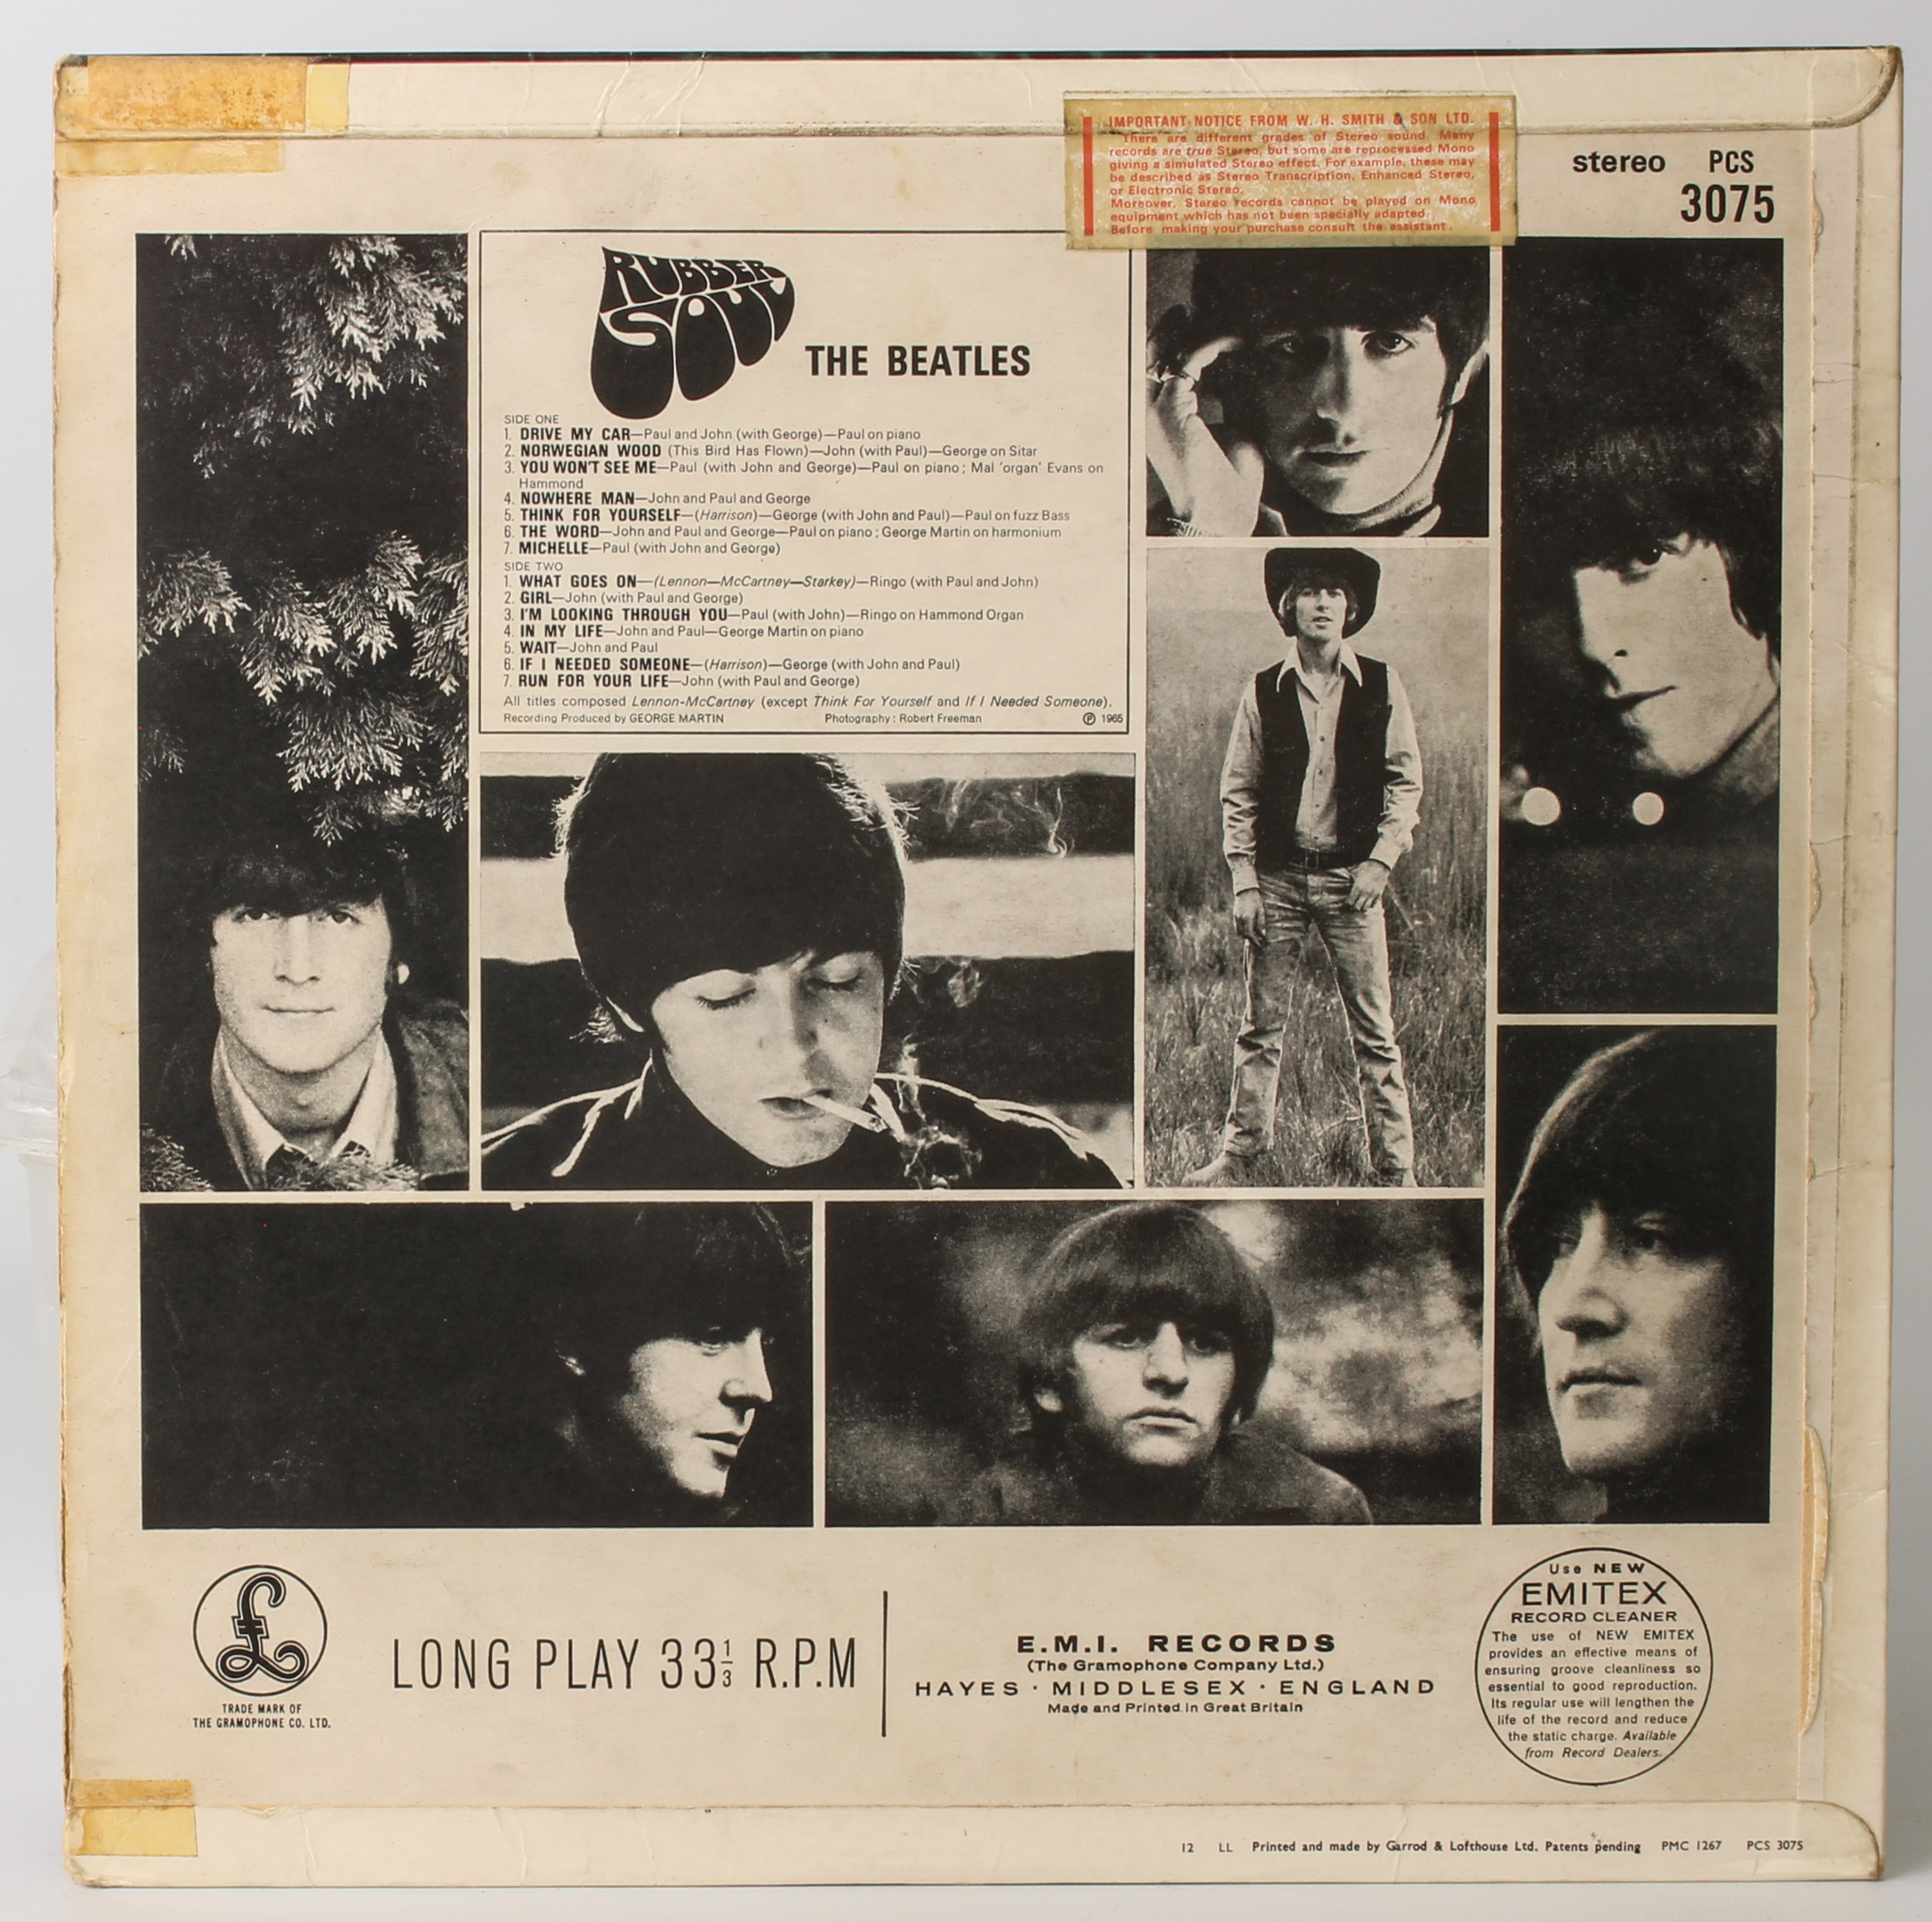 The Beatles - Rubber Soul (original UK first pressing stereo; Parlophone Records PCS 3075) - Image 4 of 4